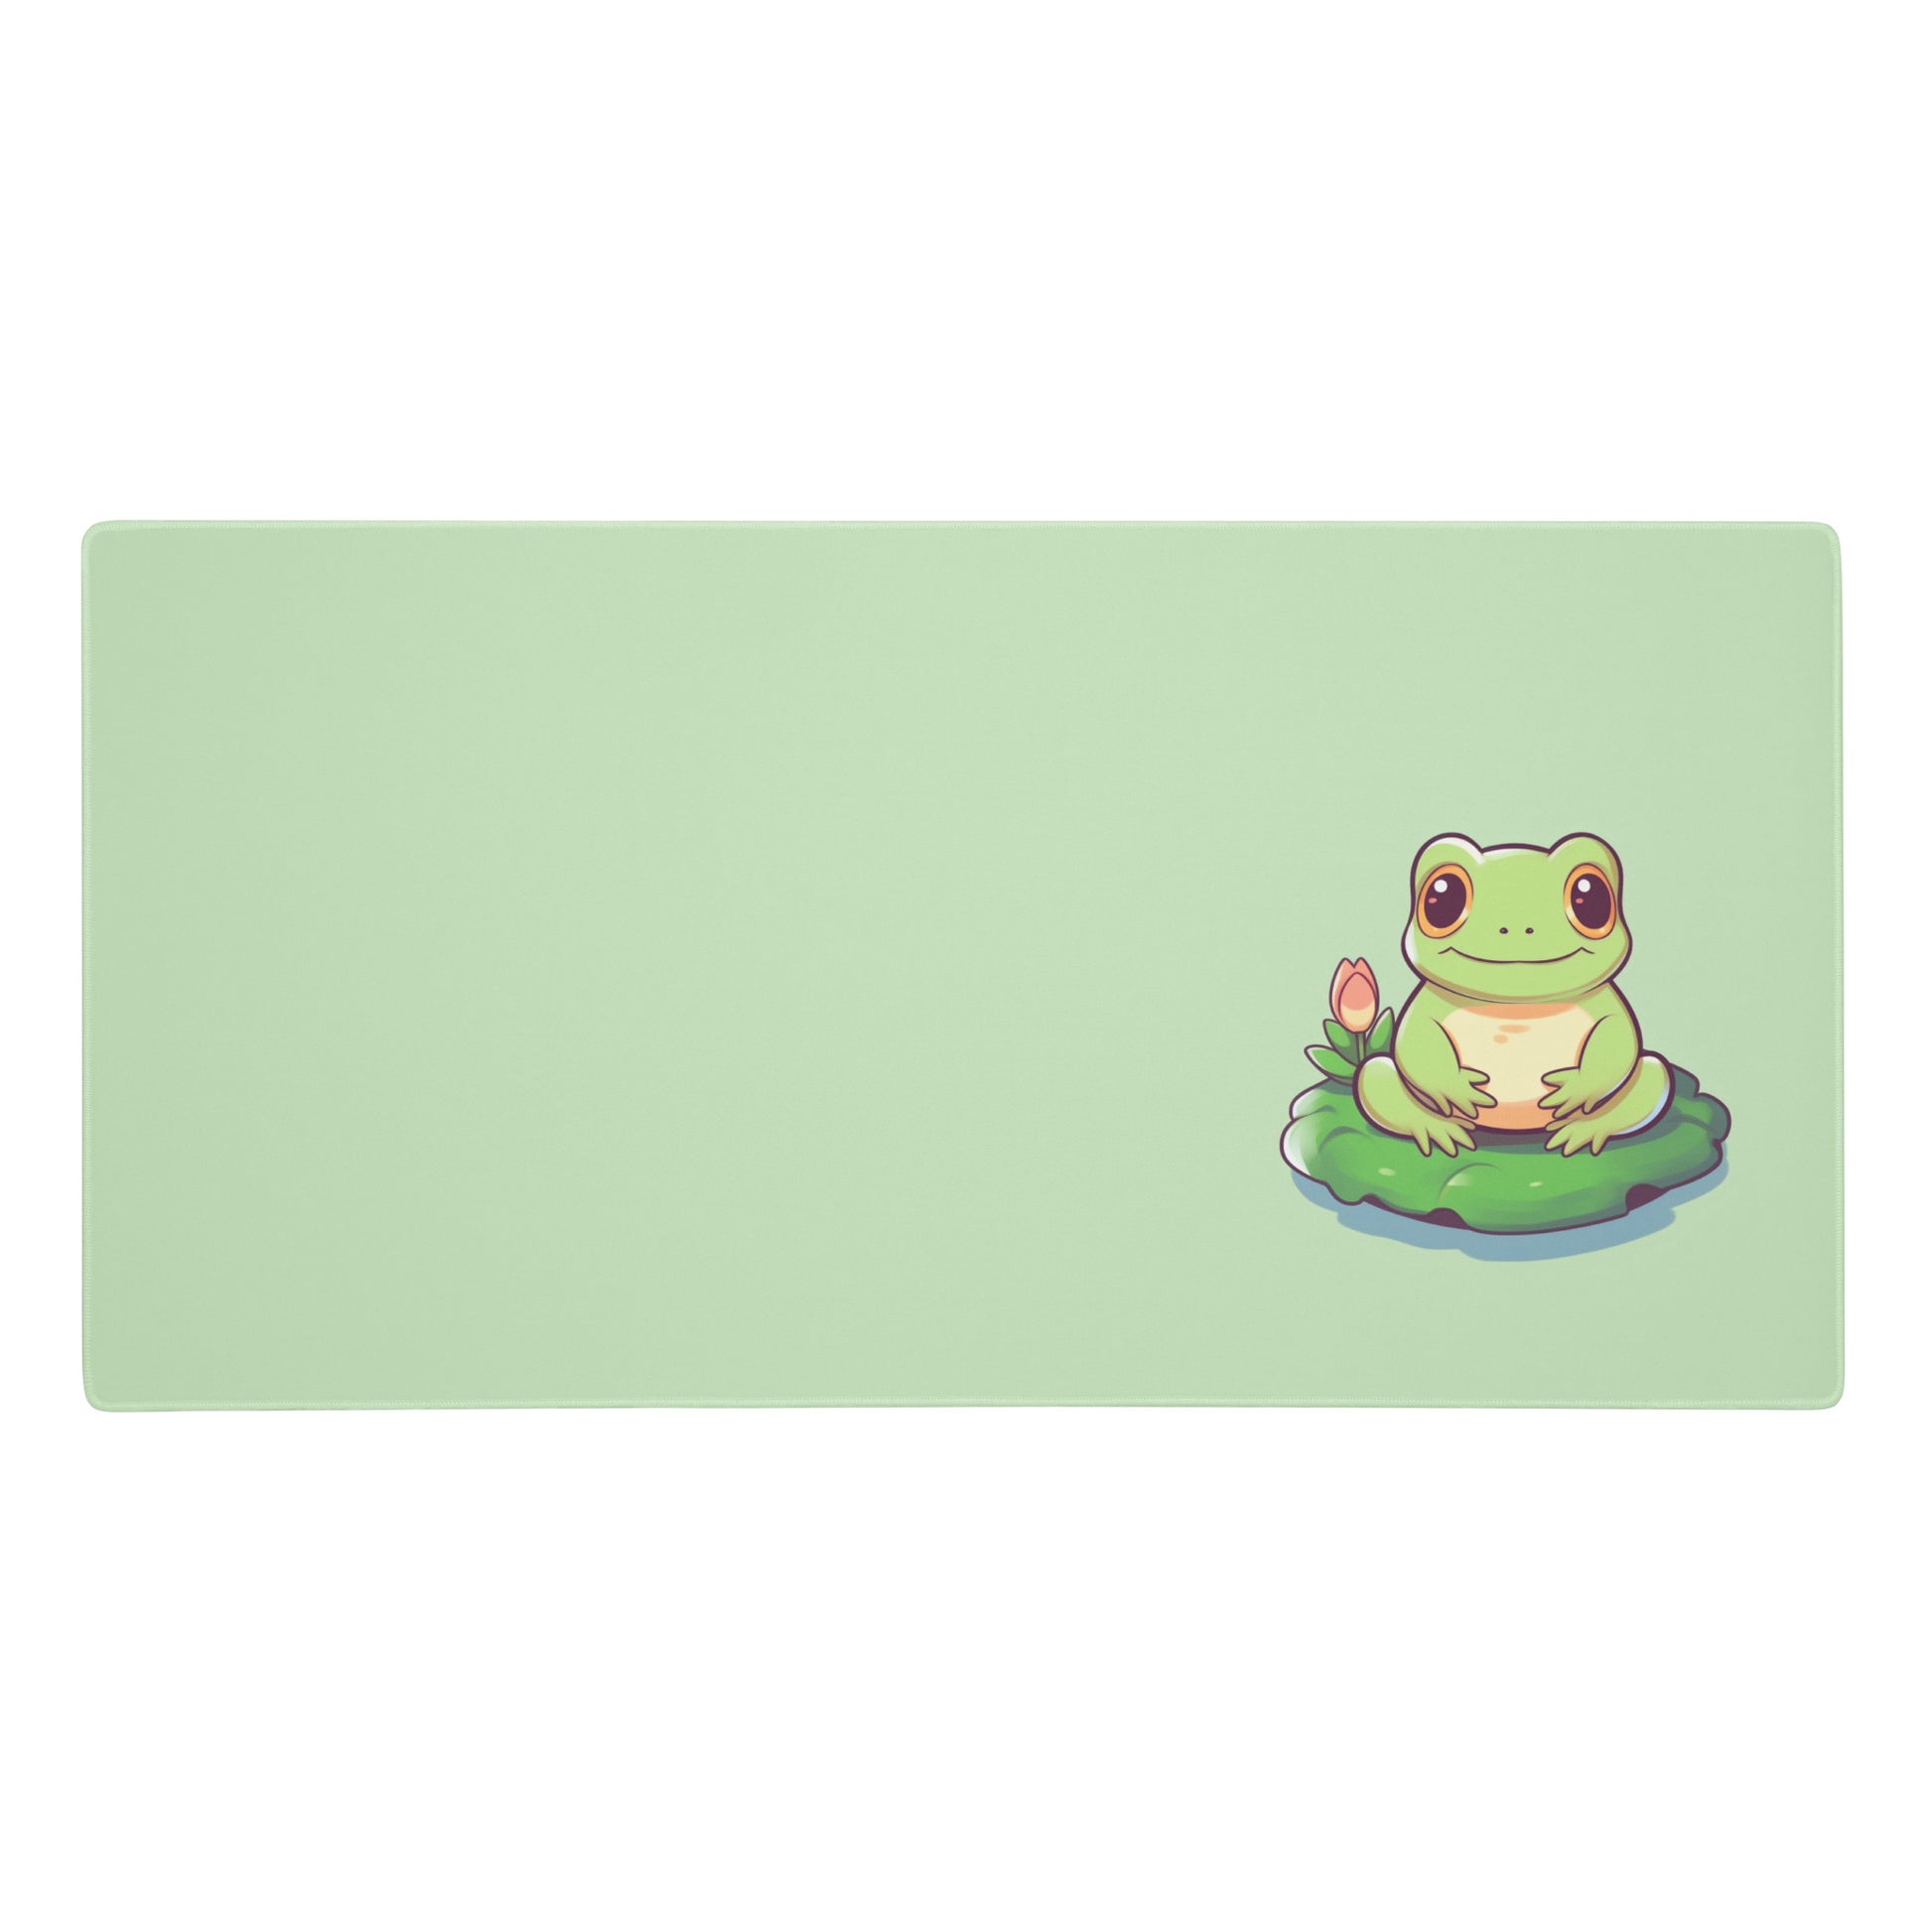 A 36" x 18" desk pad with a cute frog on it. Green in color.